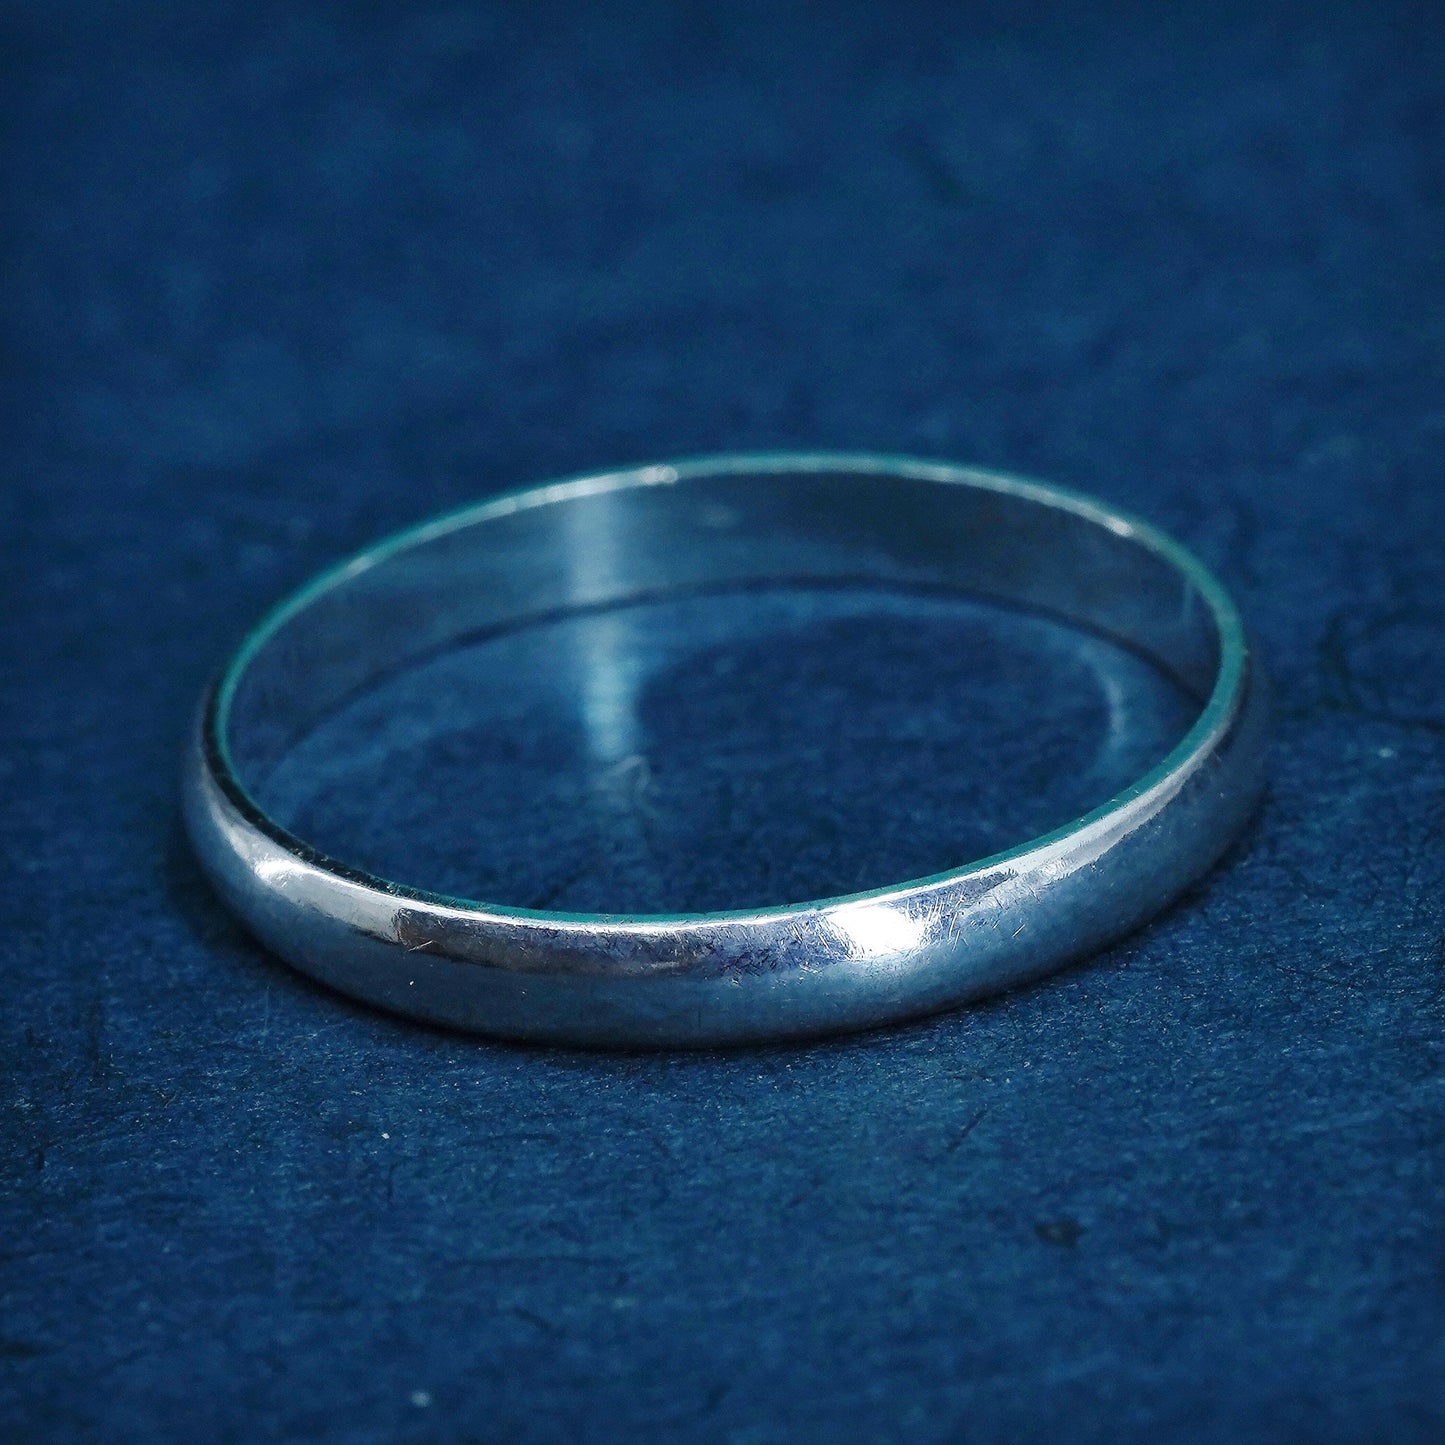 Size 11.25, vintage Sterling silver handmade ring, 925 wedding band